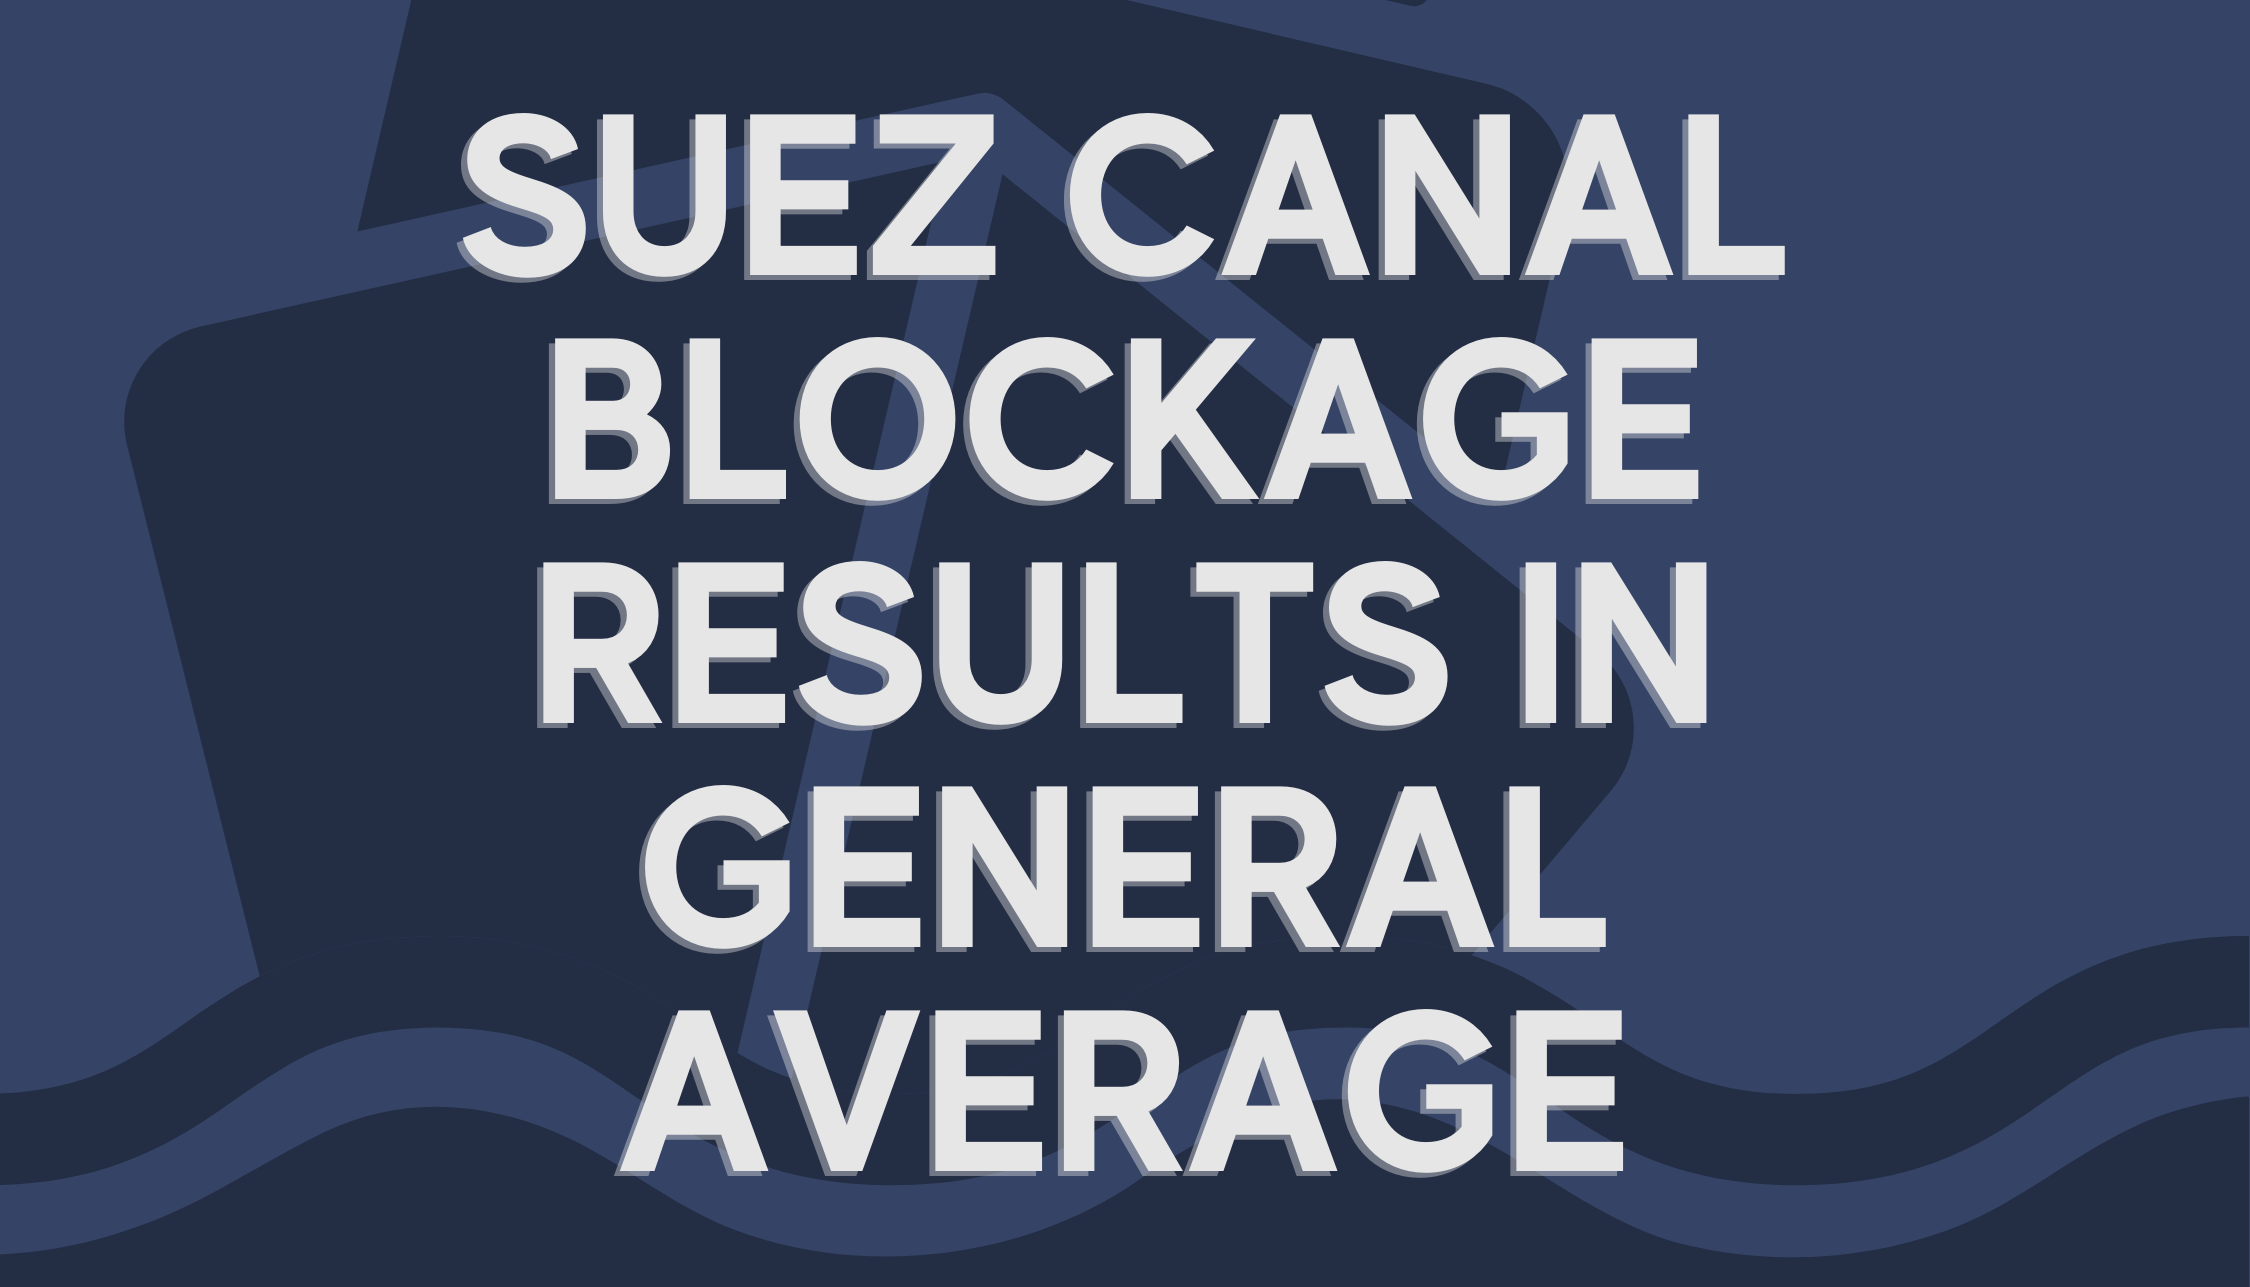 Suez Canal Blockage Results in General Average